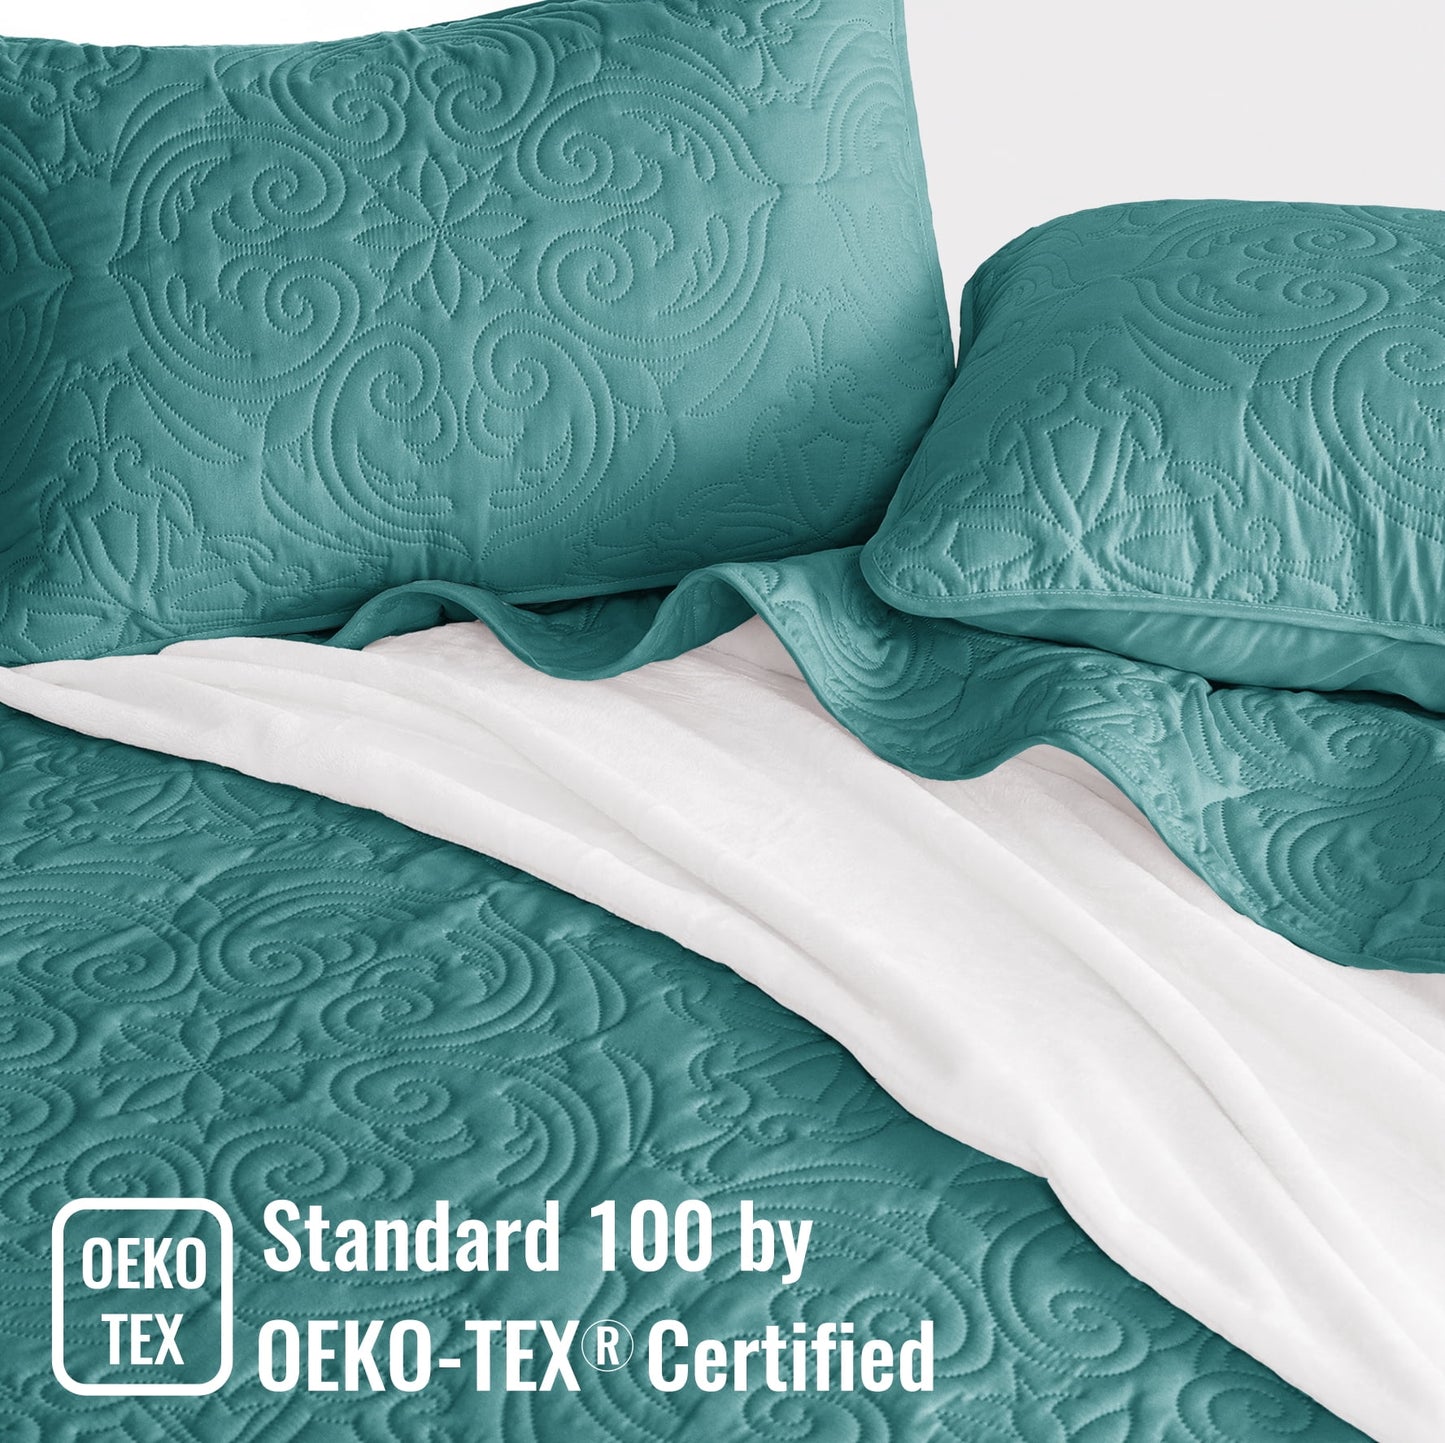 Exclusivo Mezcla Oversized King Quilt Bedding Set, Lightweight Vintage California Cal King Size Quilts with Pillow Shams, Soft Bedspreads Coverlets for All Seasons, (112"x104", Teal)